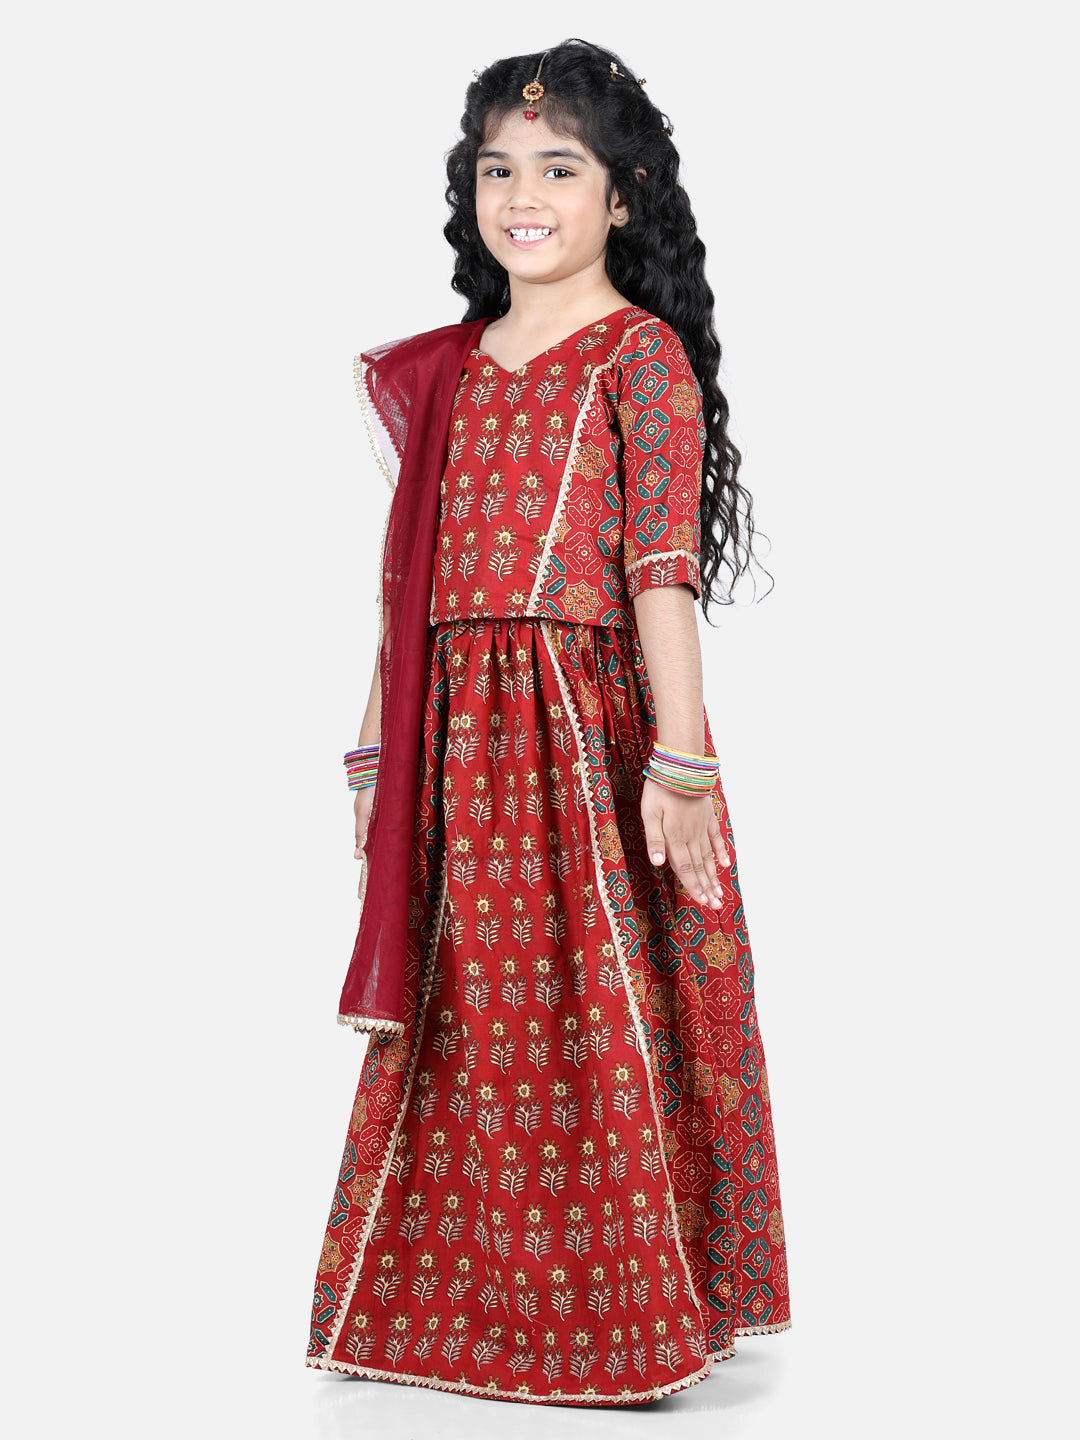 Red motif printed lace embellished top with lehenga and dupatta